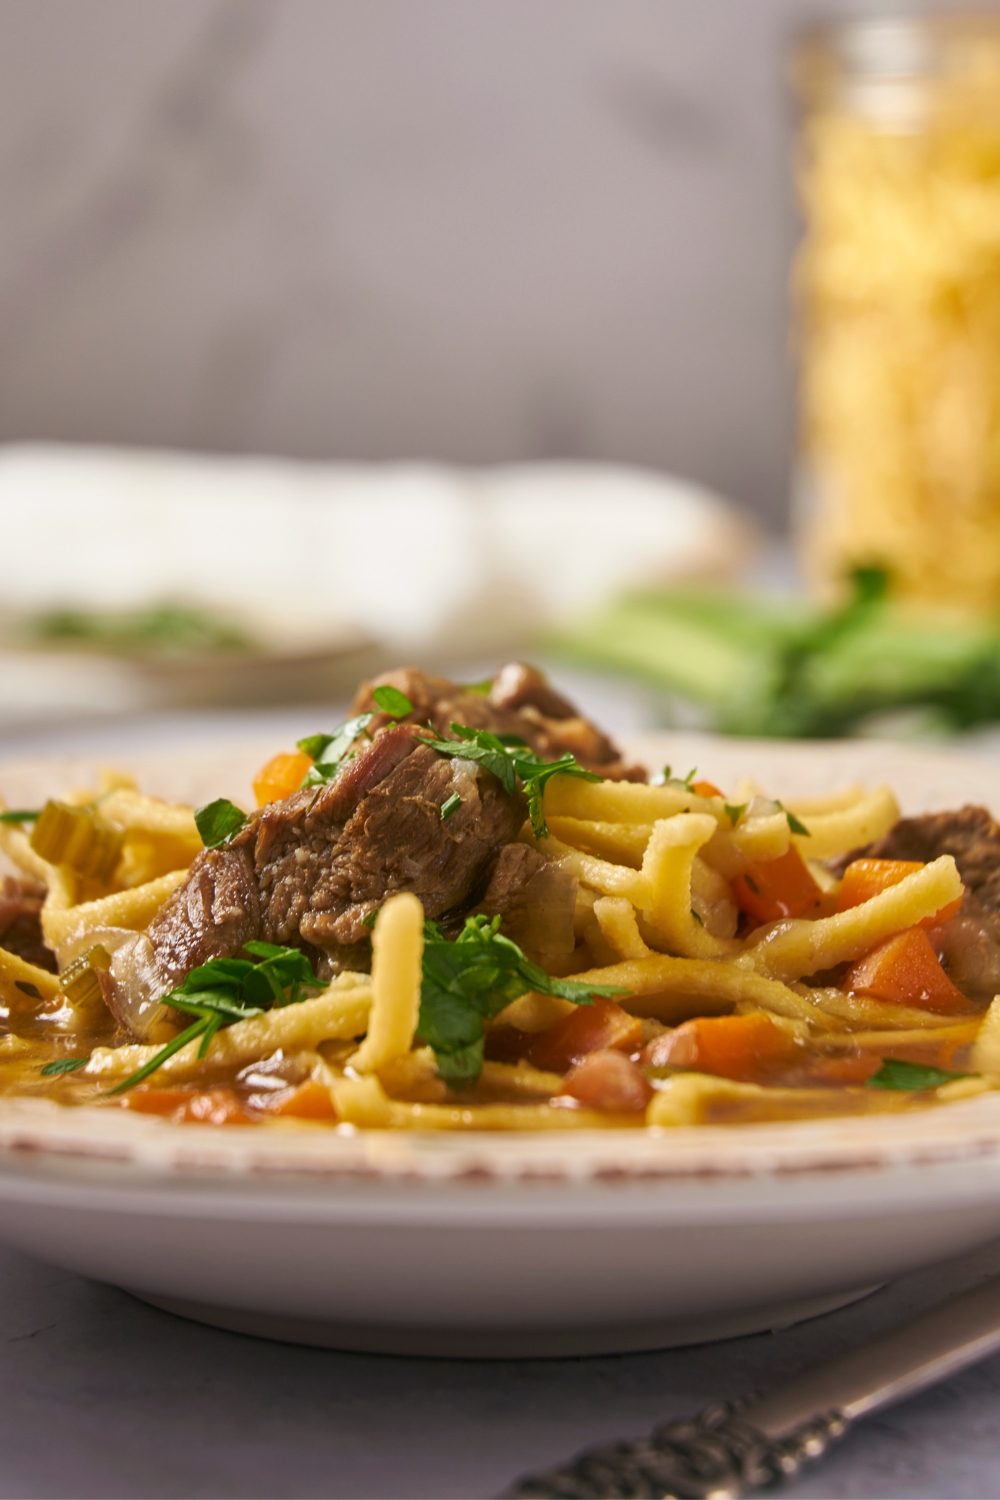 Beef cubes and noodles in part of a bowl.